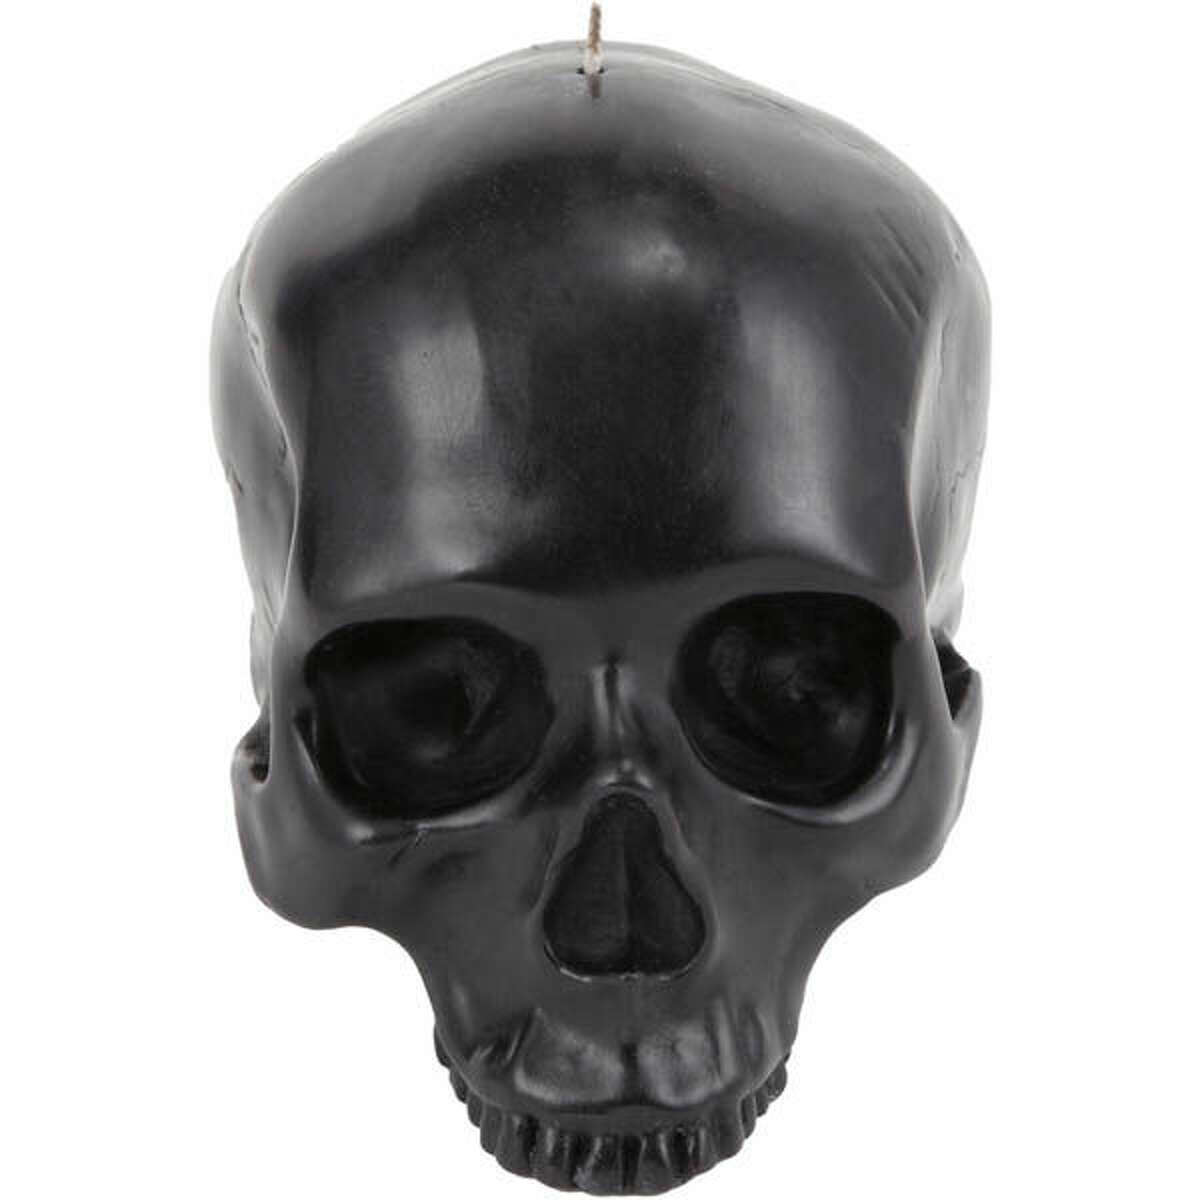 D.L. & Co. large skull candle, $85, from J. Seitz, New Preston, 860-868-0119, jseitz.com.